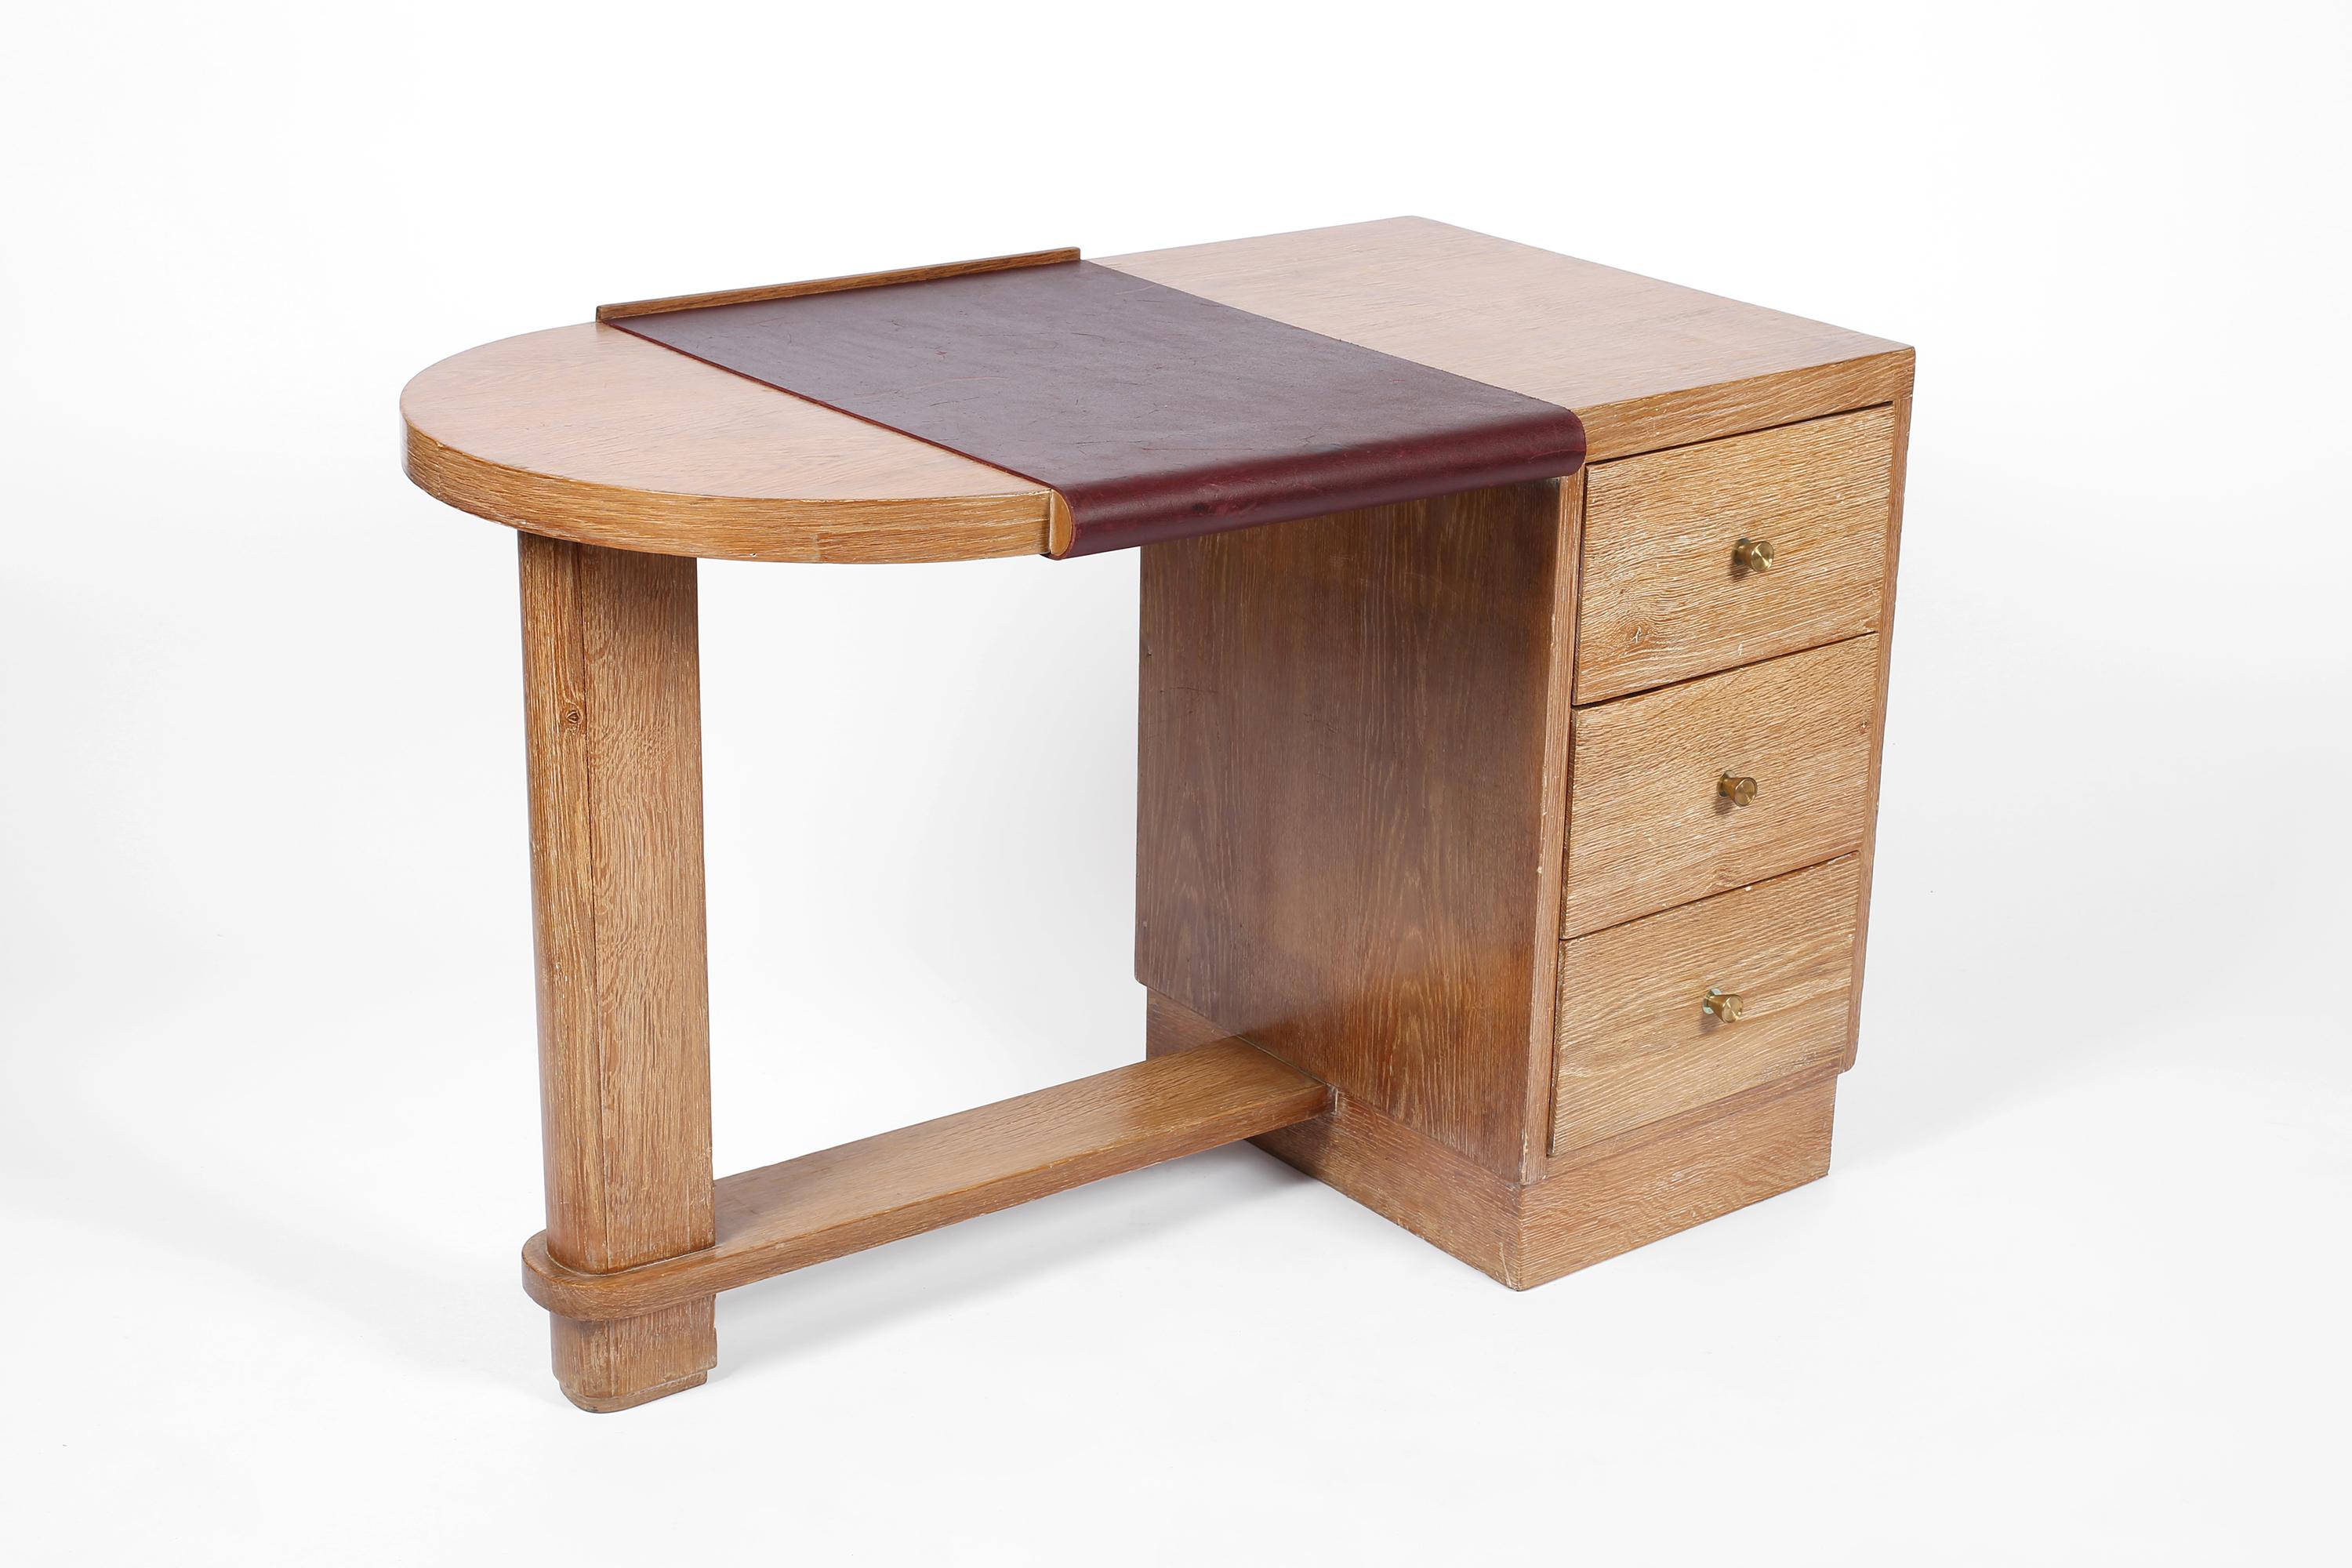 Mid-20th Century 1930s French Art Deco Limed Oak and Leather Desk in the manner of Jacques Adnet For Sale